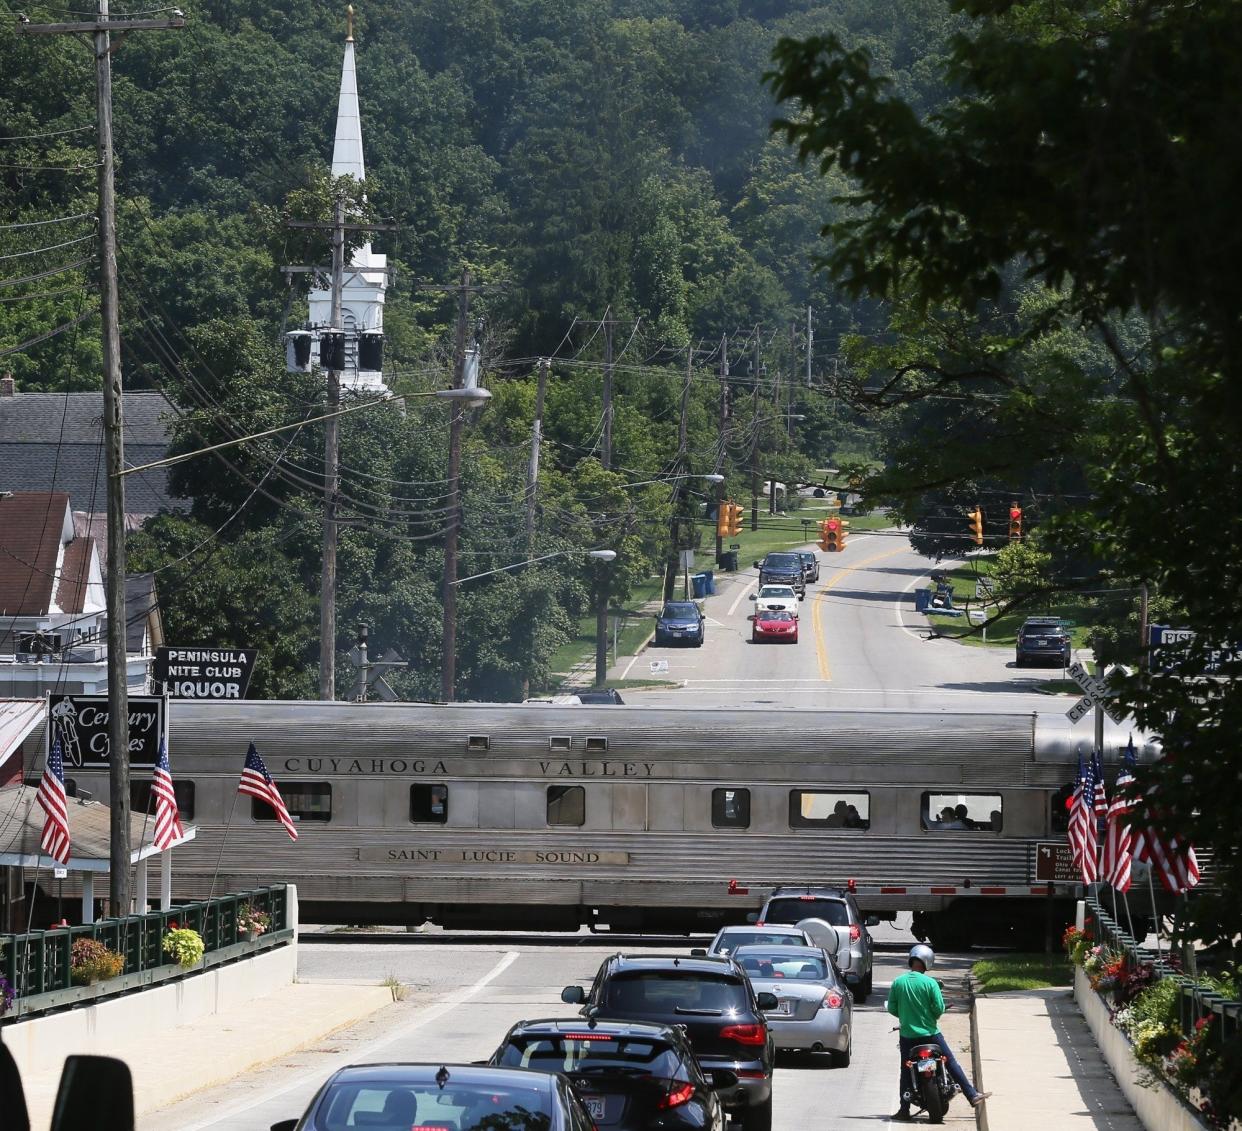 The Cuyahoga Valley Scenic Railroad train crosses State Route 303 through the heart of Peninsula, Ohio, on Wednesday, July 24, 2019. [Mike Cardew/Beacon Journal]